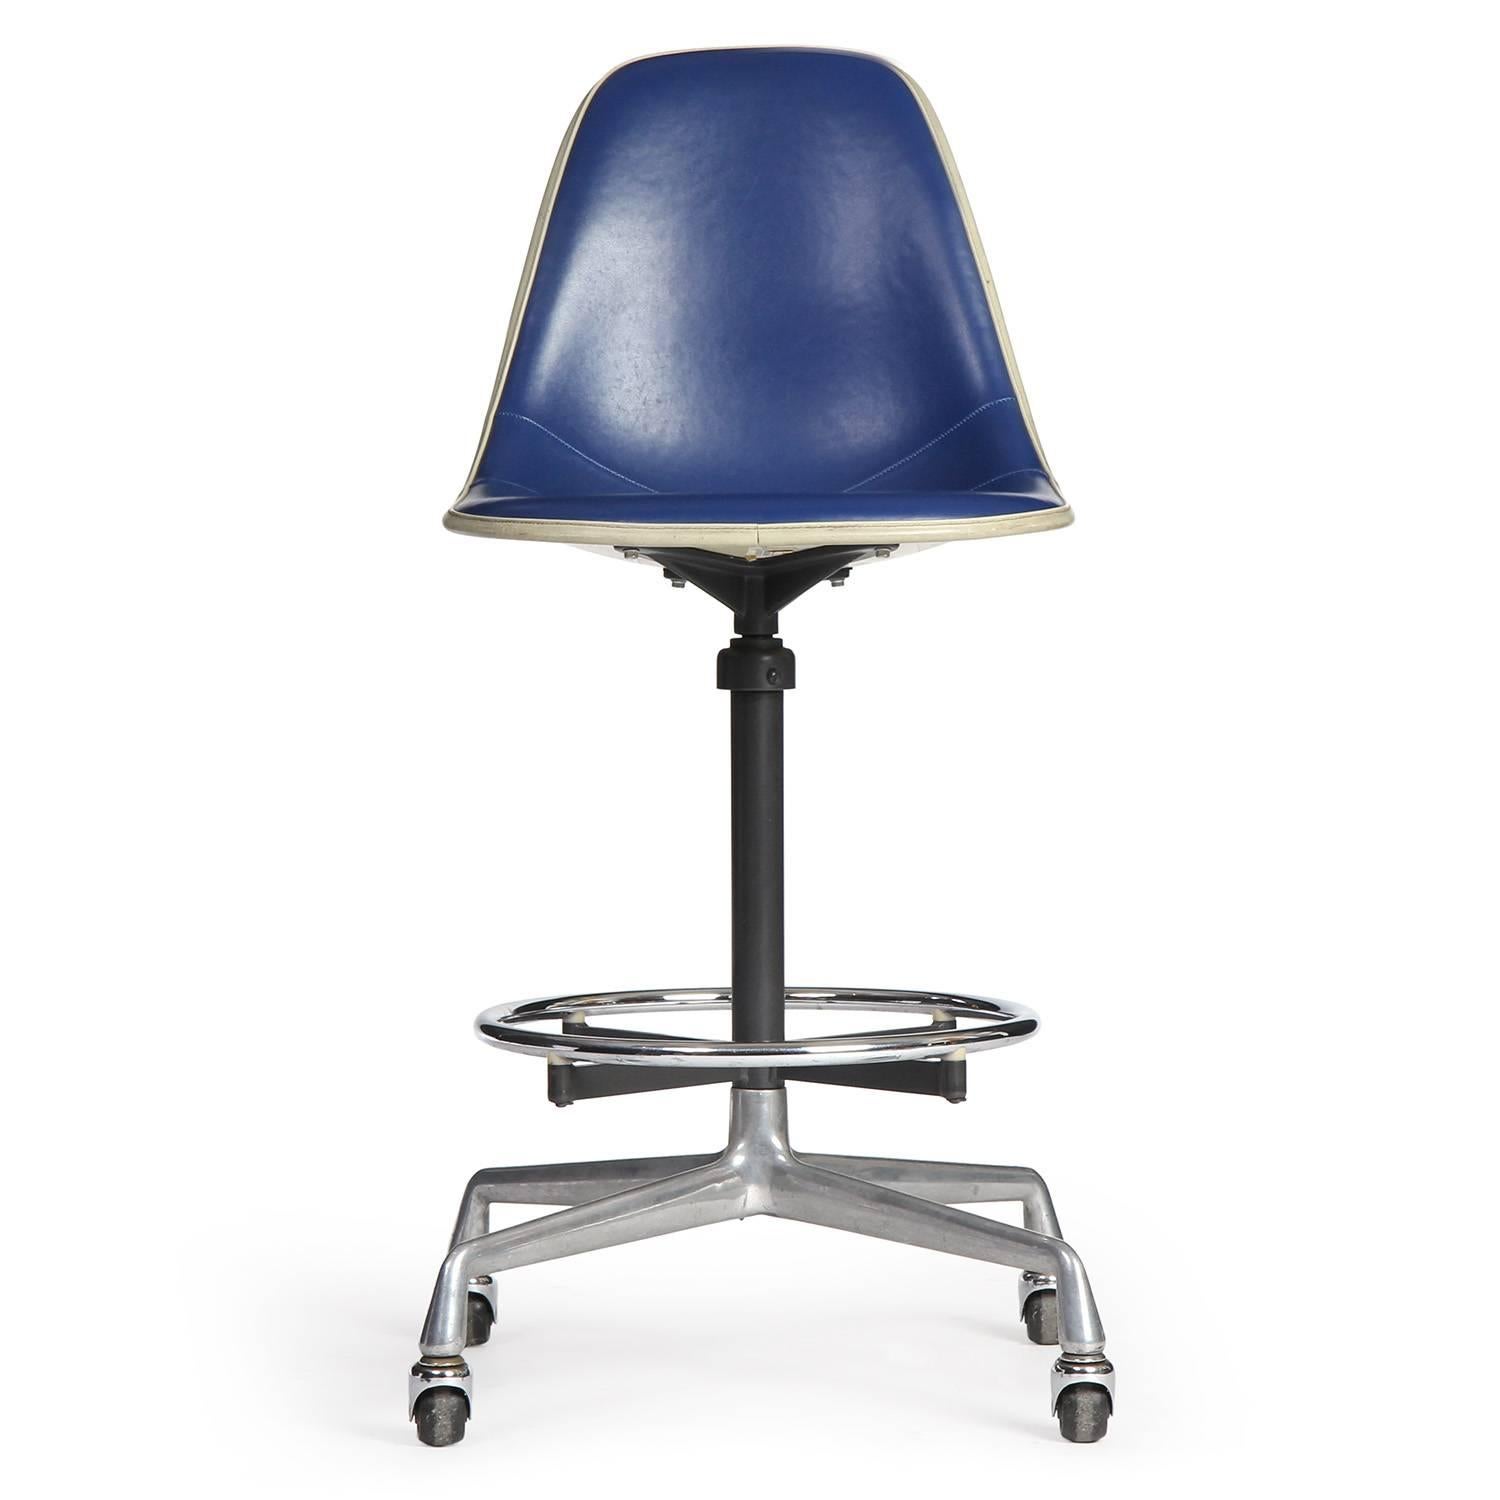 A graphic and adjustable swiveling tall armless task chair on an early four pronged base with casters, having a floating circular foot rest.